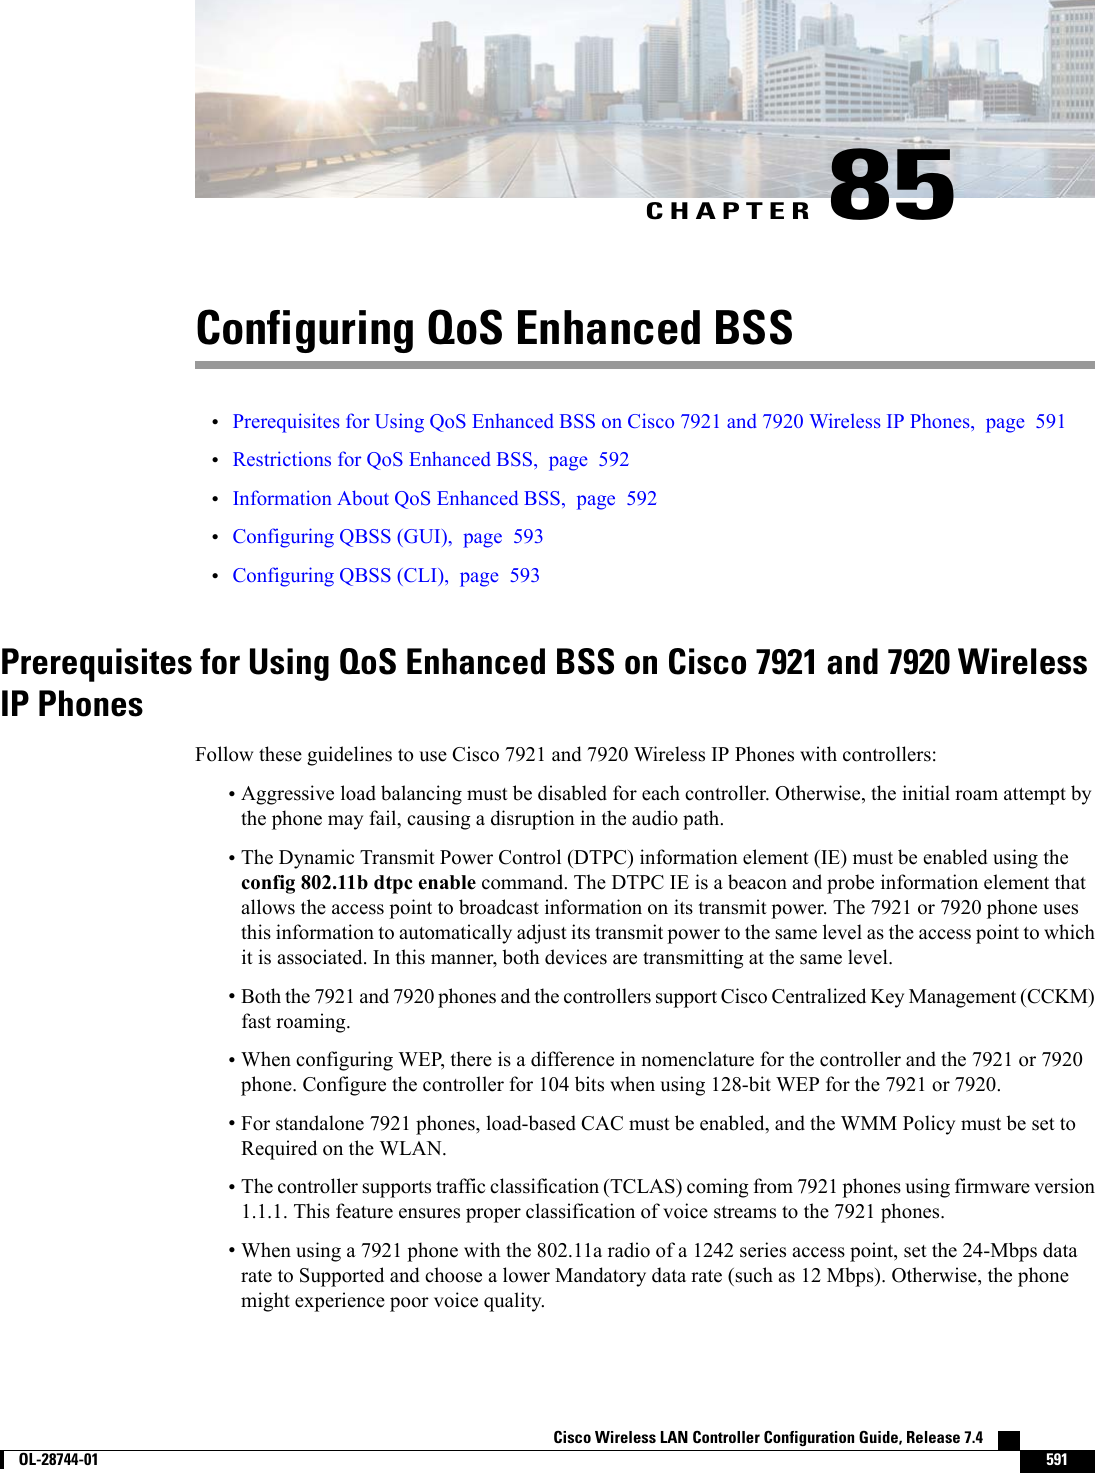 CHAPTER 85Configuring QoS Enhanced BSS•Prerequisites for Using QoS Enhanced BSS on Cisco 7921 and 7920 Wireless IP Phones, page 591•Restrictions for QoS Enhanced BSS, page 592•Information About QoS Enhanced BSS, page 592•Configuring QBSS (GUI), page 593•Configuring QBSS (CLI), page 593Prerequisites for Using QoS Enhanced BSS on Cisco 7921 and 7920 WirelessIP PhonesFollow these guidelines to use Cisco 7921 and 7920 Wireless IP Phones with controllers:•Aggressive load balancing must be disabled for each controller. Otherwise, the initial roam attempt bythe phone may fail, causing a disruption in the audio path.•The Dynamic Transmit Power Control (DTPC) information element (IE) must be enabled using theconfig 802.11b dtpc enable command. The DTPC IE is a beacon and probe information element thatallows the access point to broadcast information on its transmit power. The 7921 or 7920 phone usesthis information to automatically adjust its transmit power to the same level as the access point to whichit is associated. In this manner, both devices are transmitting at the same level.•Both the 7921 and 7920 phones and the controllers support Cisco Centralized Key Management (CCKM)fast roaming.•When configuring WEP, there is a difference in nomenclature for the controller and the 7921 or 7920phone. Configure the controller for 104 bits when using 128-bit WEP for the 7921 or 7920.•For standalone 7921 phones, load-based CAC must be enabled, and the WMM Policy must be set toRequired on the WLAN.•The controller supports traffic classification (TCLAS) coming from 7921 phones using firmware version1.1.1. This feature ensures proper classification of voice streams to the 7921 phones.•When using a 7921 phone with the 802.11a radio of a 1242 series access point, set the 24-Mbps datarate to Supported and choose a lower Mandatory data rate (such as 12 Mbps). Otherwise, the phonemight experience poor voice quality.Cisco Wireless LAN Controller Configuration Guide, Release 7.4        OL-28744-01 591